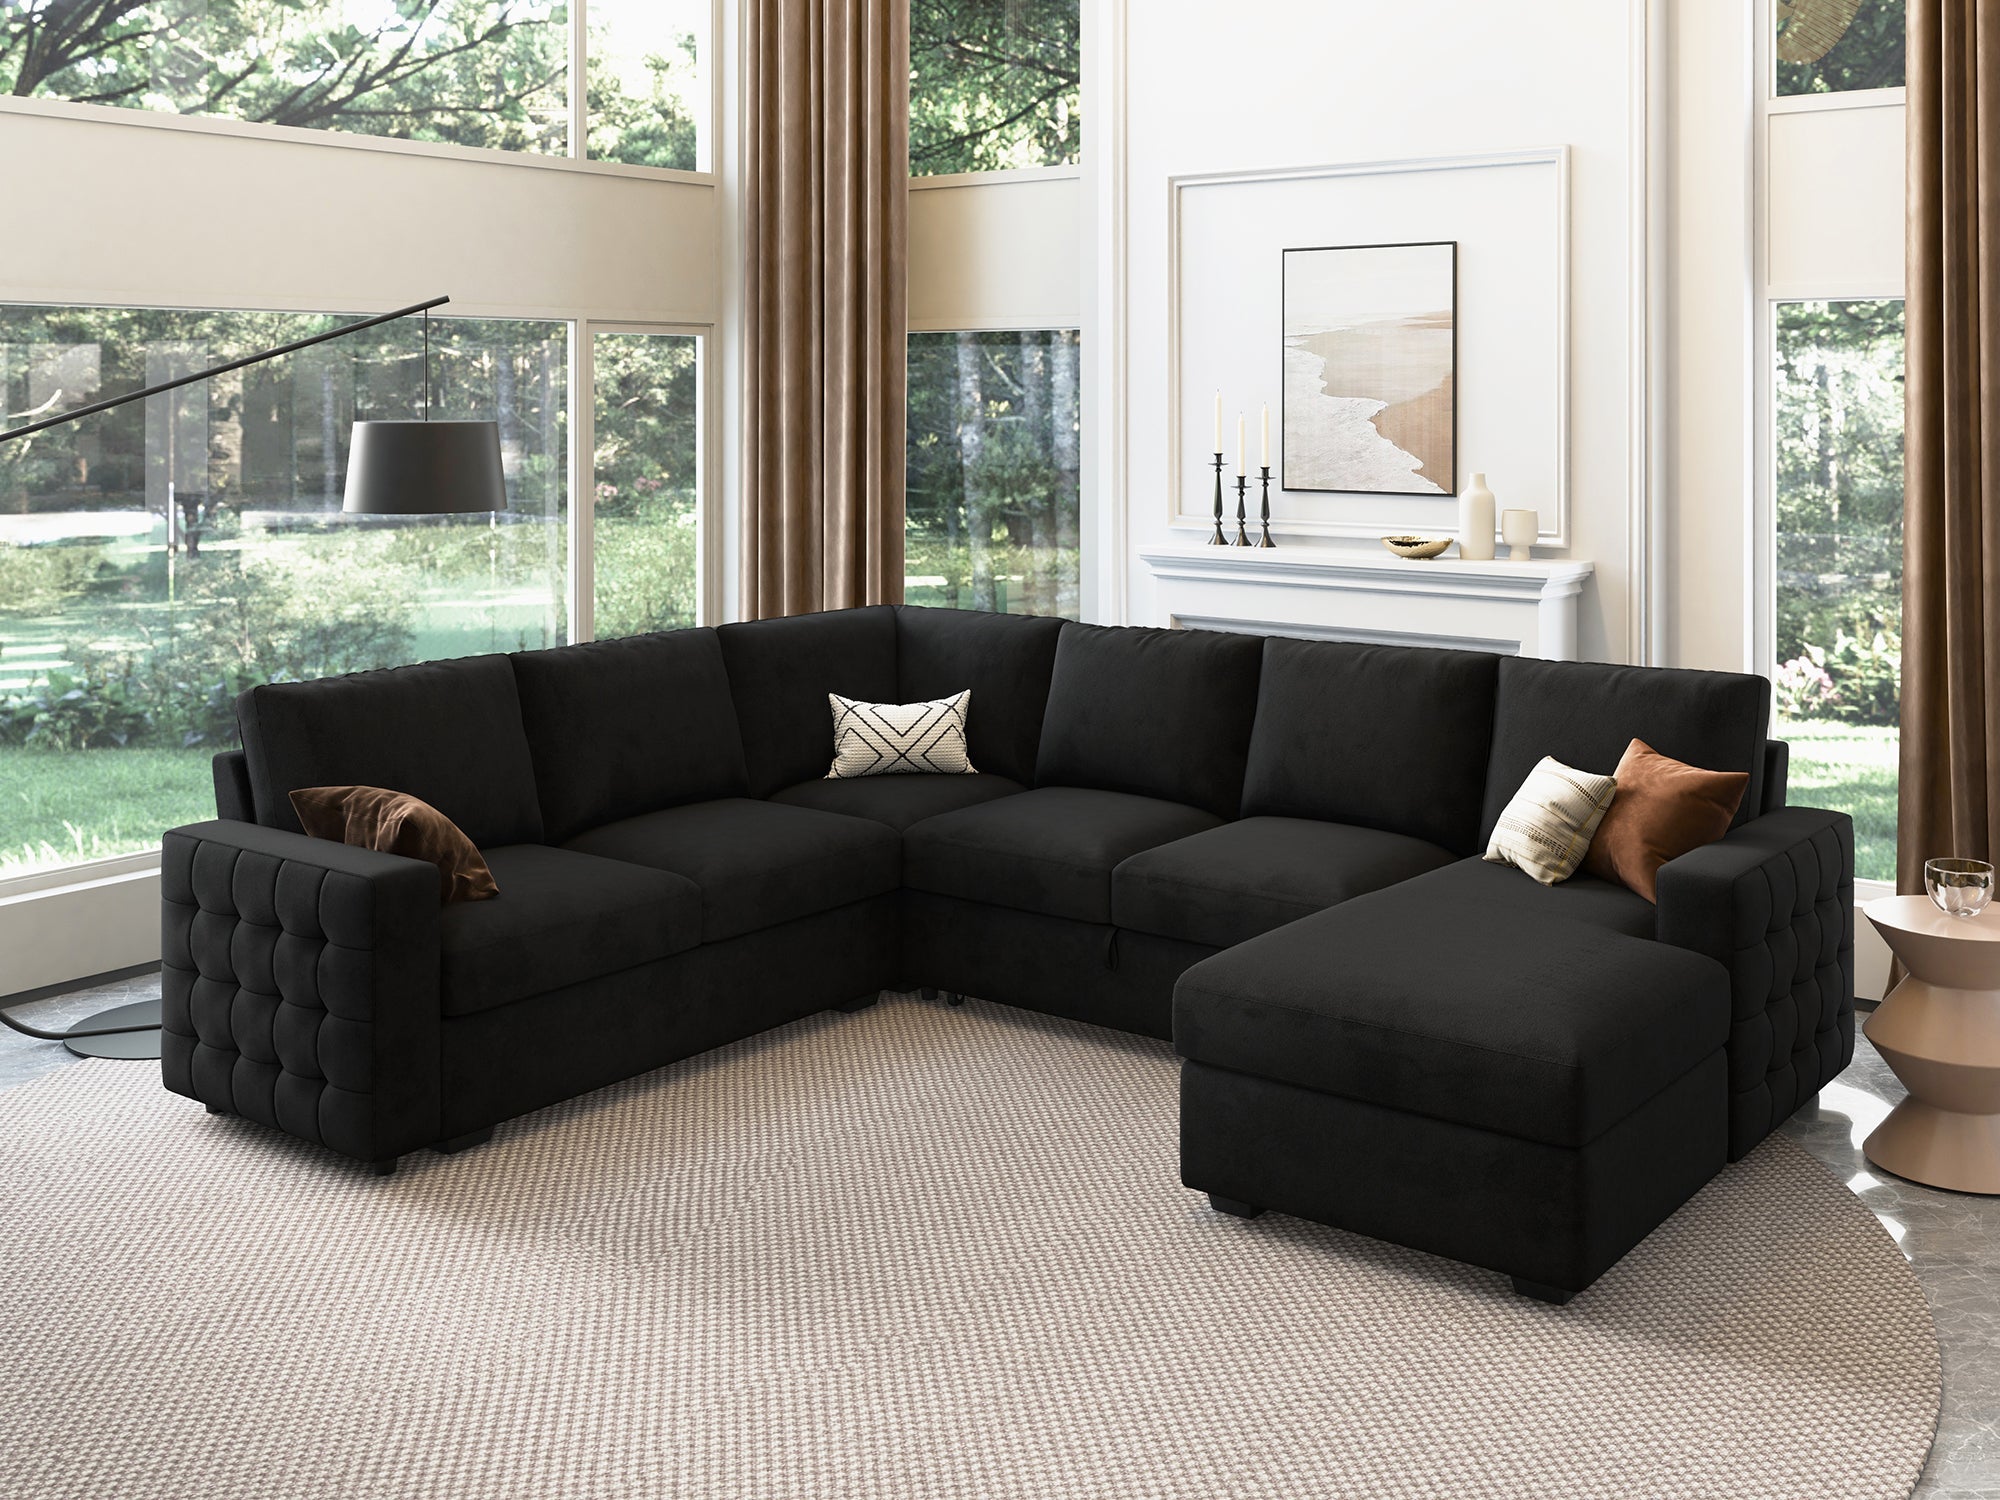 HONBAY 6-Piece Velvet Sleeper Sectional With Storage Space